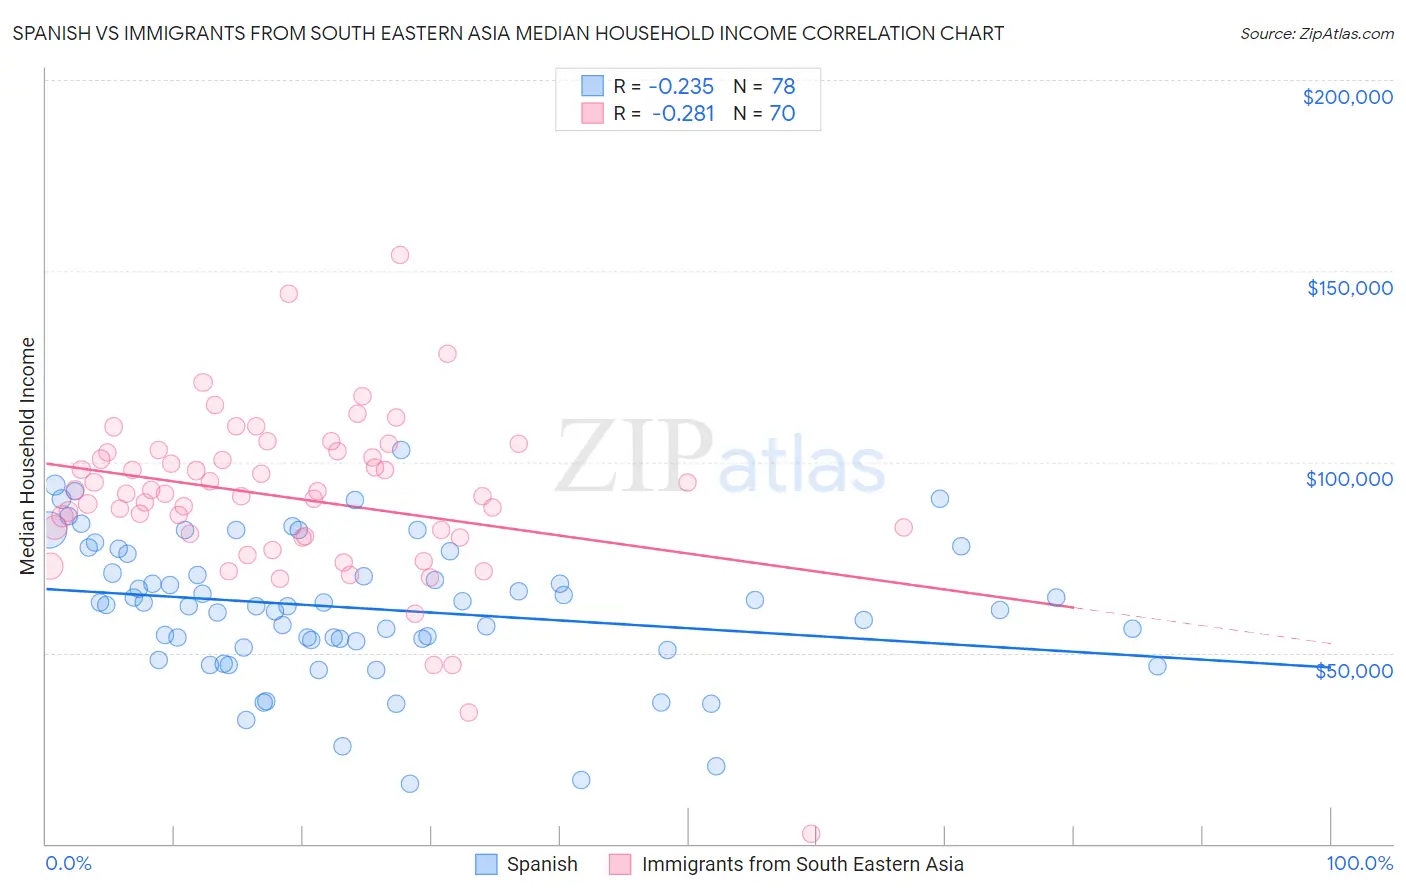 Spanish vs Immigrants from South Eastern Asia Median Household Income